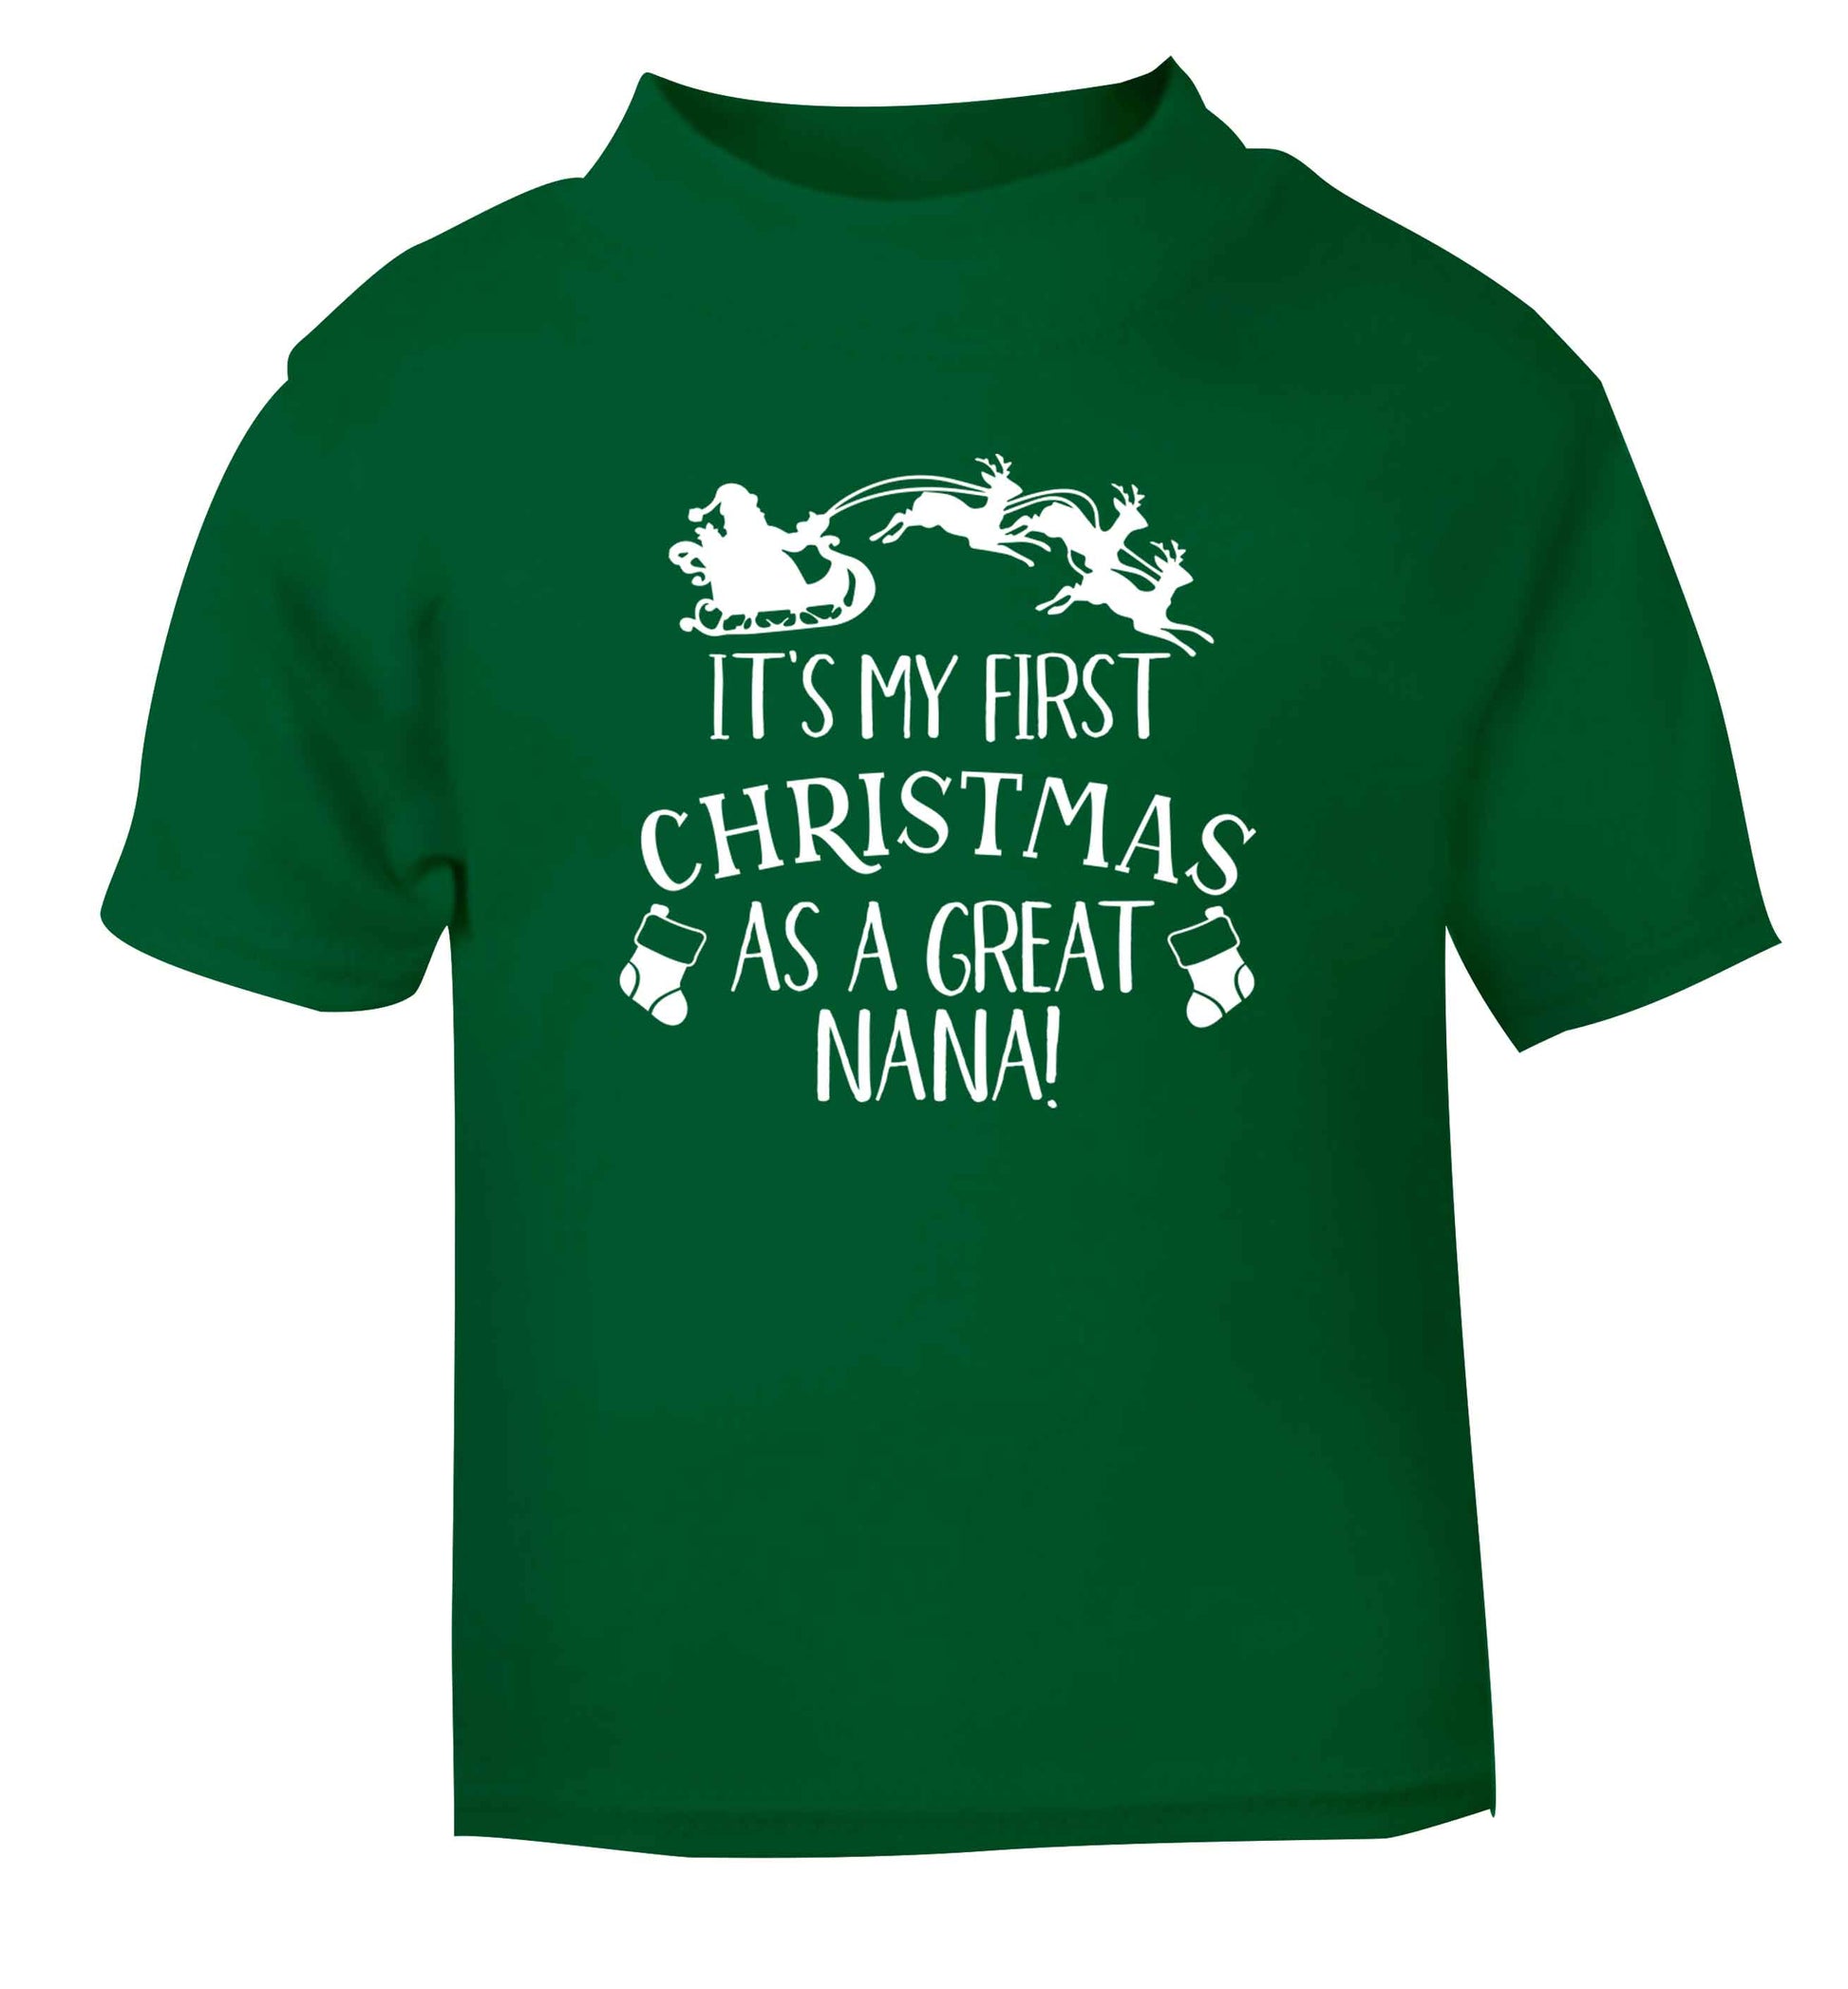 It's my first Christmas as a great nana! green Baby Toddler Tshirt 2 Years